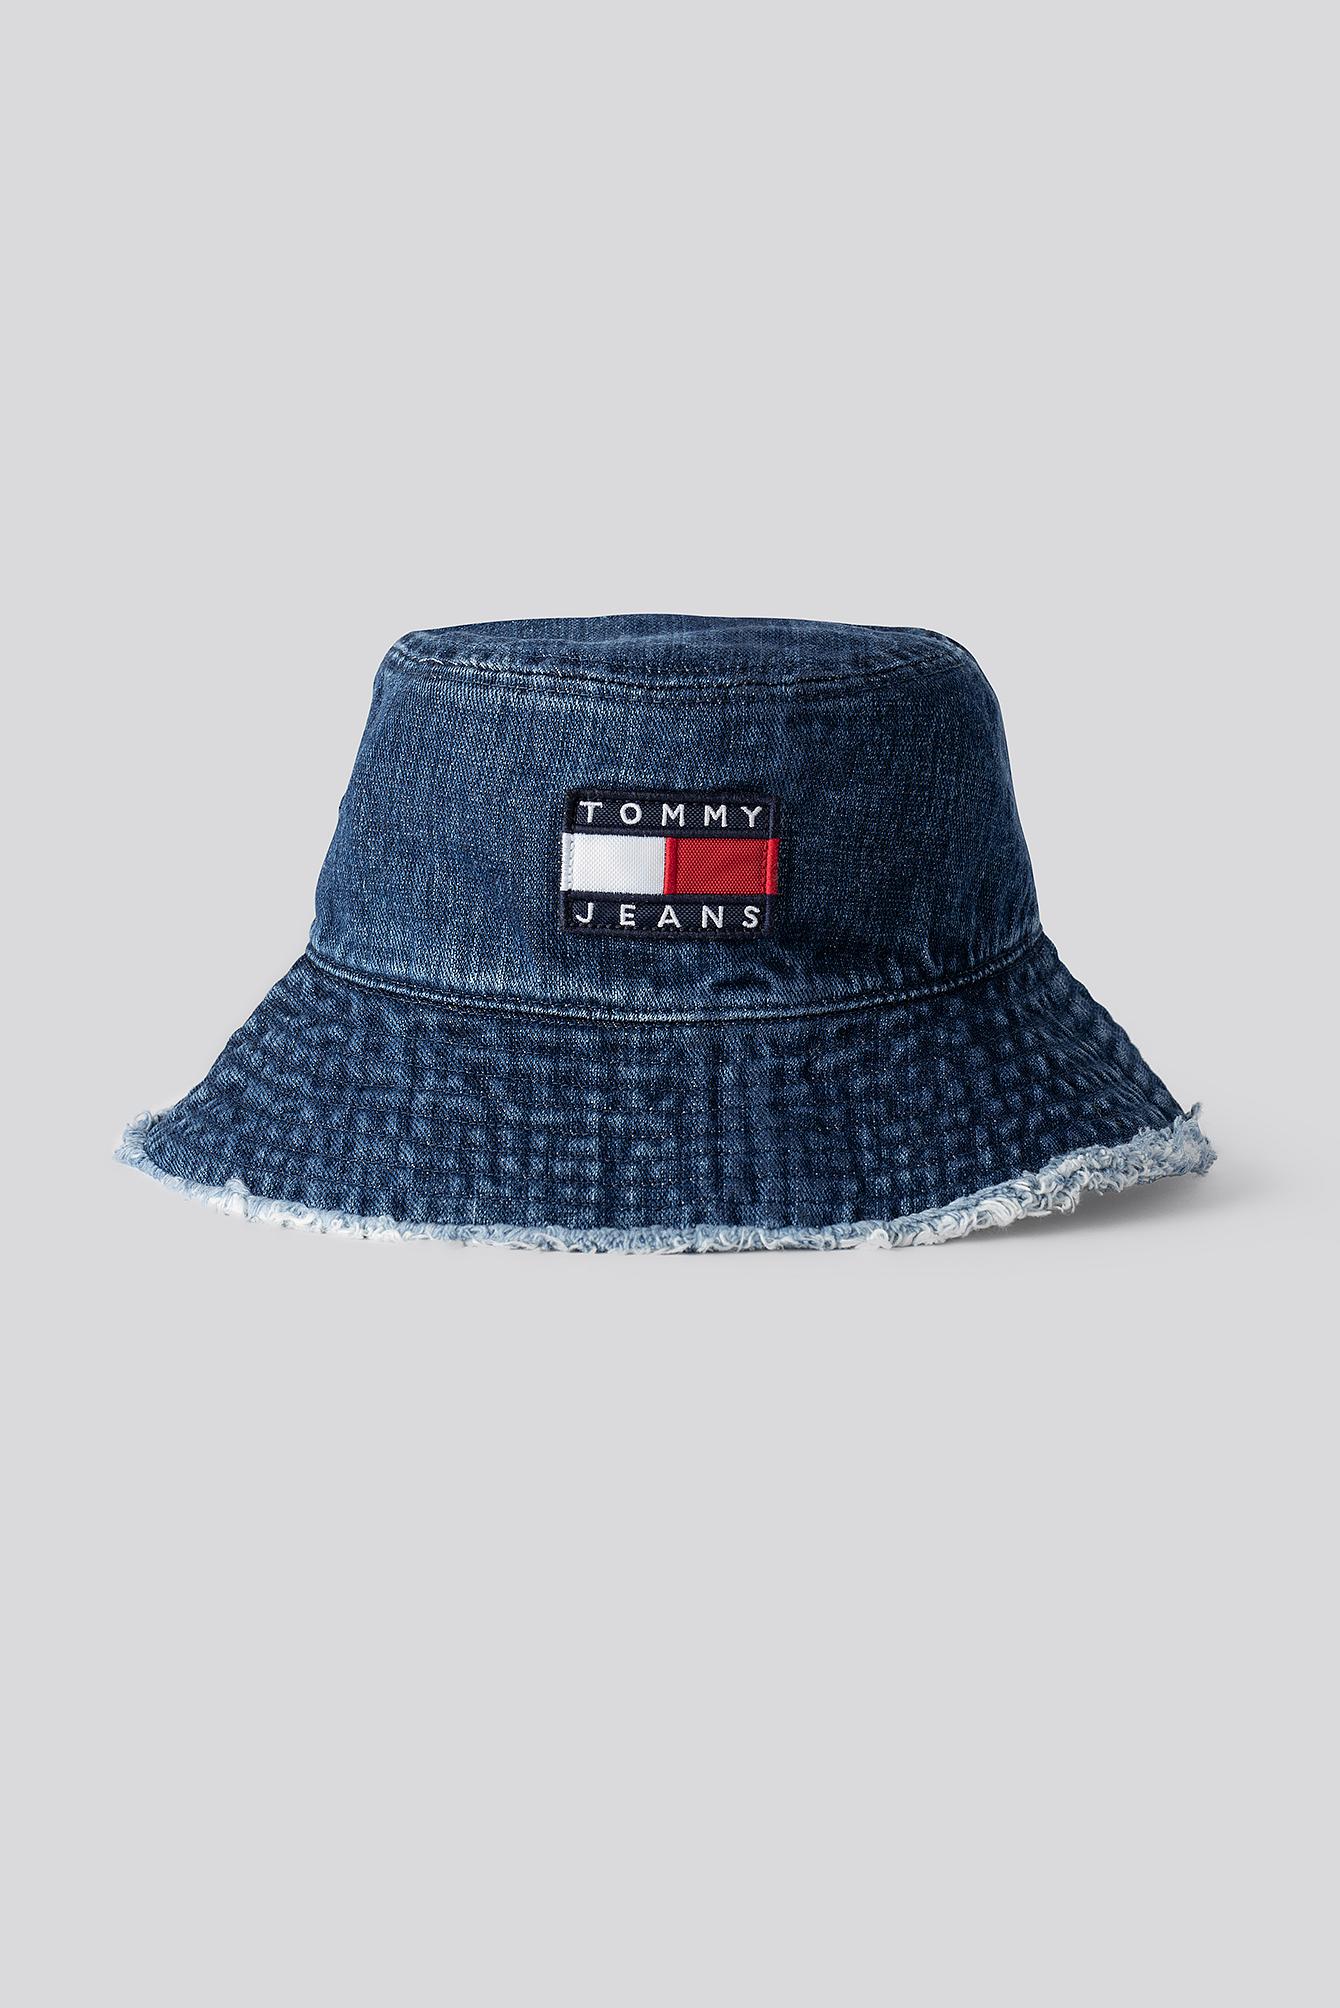 Tommy Hilfiger Heritage Bucket Hat Denmark, SAVE 46% - aveclumiere.com